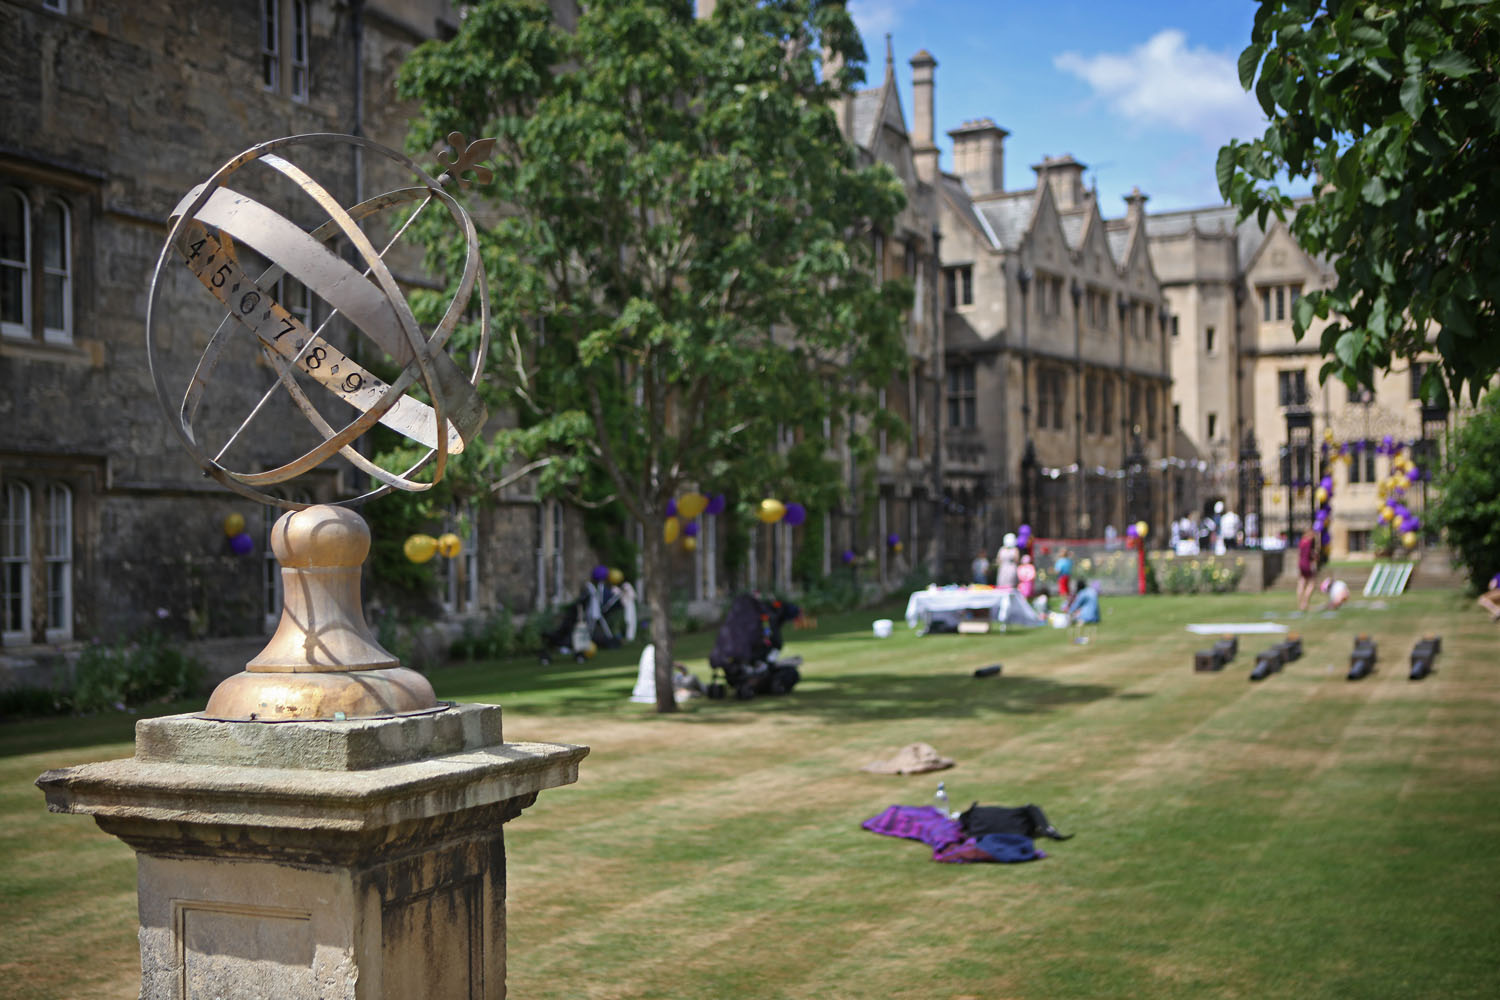  Photography of Merton College and the Merton College/Society 2017 Family Fayre, held at Merton College Oxford on the 25th June 2017. 